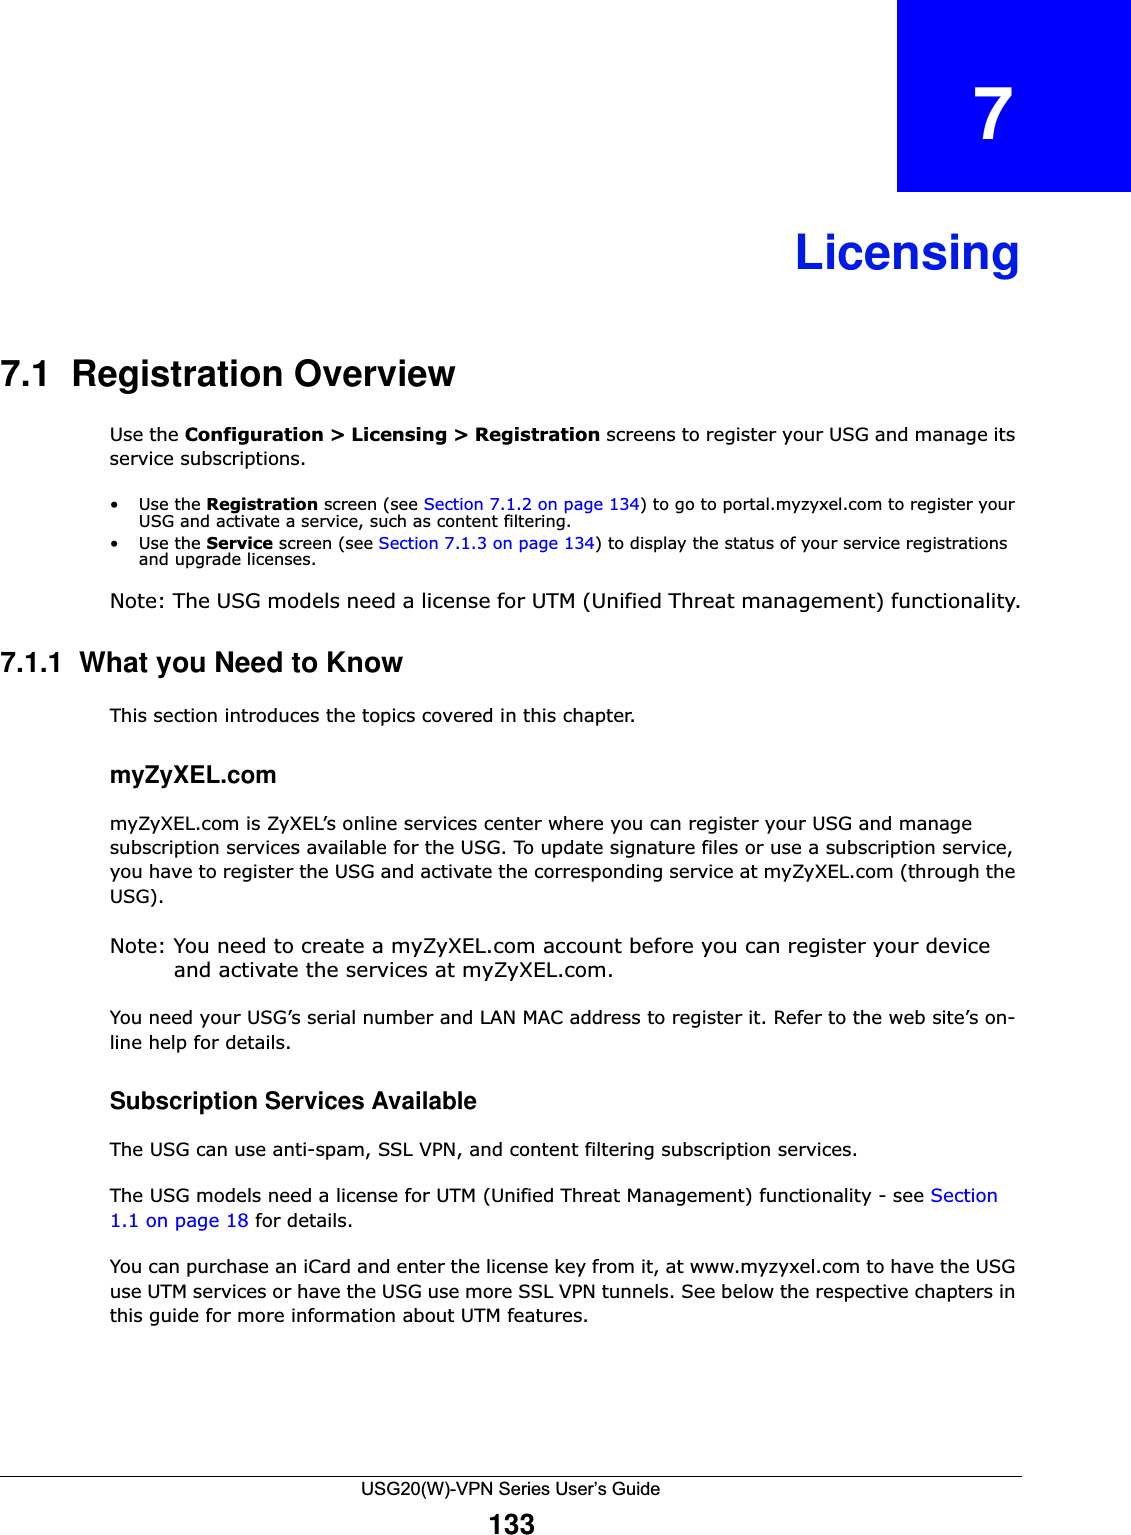 USG20(W)-VPN Series User’s Guide133CHAPTER   7Licensing7.1  Registration OverviewUse the Configuration &gt; Licensing &gt; Registration screens to register your USG and manage its service subscriptions.•Use the Registration screen (see Section 7.1.2 on page 134) to go to portal.myzyxel.com to register your USG and activate a service, such as content filtering. •Use the Service screen (see Section 7.1.3 on page 134) to display the status of your service registrations and upgrade licenses. Note: The USG models need a license for UTM (Unified Threat management) functionality.7.1.1  What you Need to KnowThis section introduces the topics covered in this chapter.myZyXEL.commyZyXEL.com is ZyXEL’s online services center where you can register your USG and manage subscription services available for the USG. To update signature files or use a subscription service, you have to register the USG and activate the corresponding service at myZyXEL.com (through the USG). Note: You need to create a myZyXEL.com account before you can register your device and activate the services at myZyXEL.com.You need your USG’s serial number and LAN MAC address to register it. Refer to the web site’s on-line help for details.Subscription Services AvailableThe USG can use anti-spam, SSL VPN, and content filtering subscription services. The USG models need a license for UTM (Unified Threat Management) functionality - see Section 1.1 on page 18 for details. You can purchase an iCard and enter the license key from it, at www.myzyxel.com to have the USG use UTM services or have the USG use more SSL VPN tunnels. See below the respective chapters in this guide for more information about UTM features.